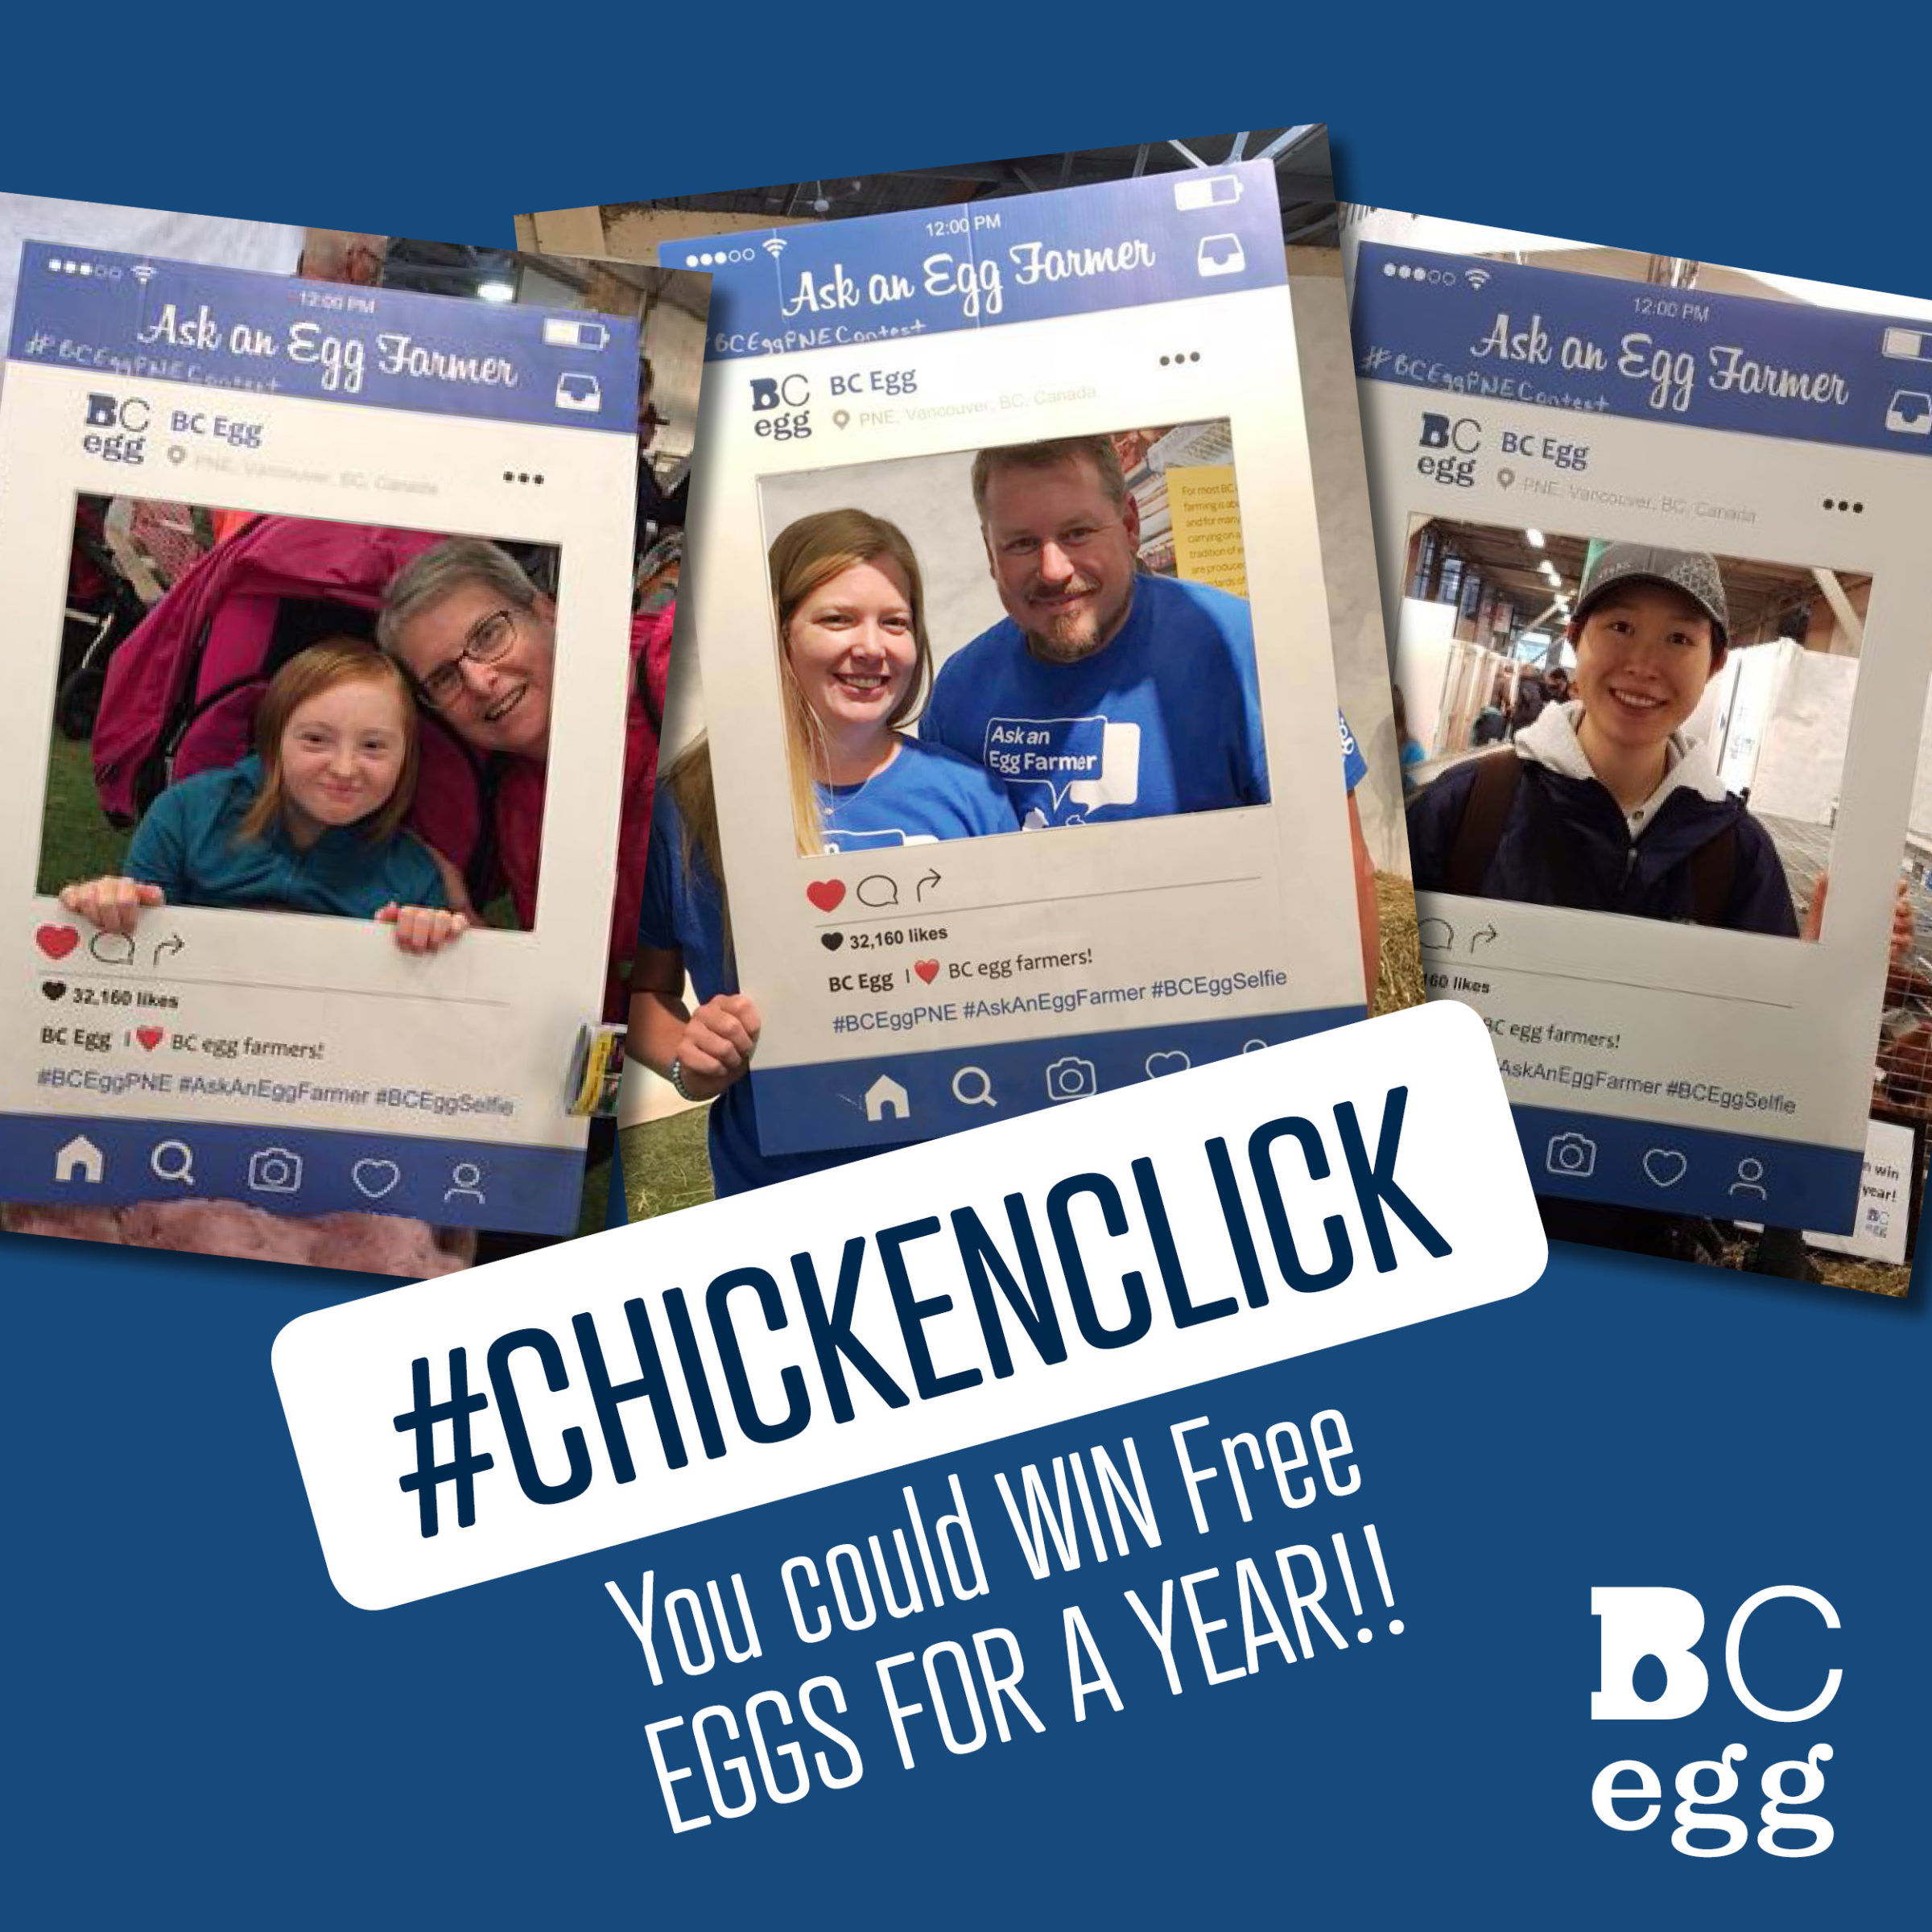 #ChickenClick selfie contest